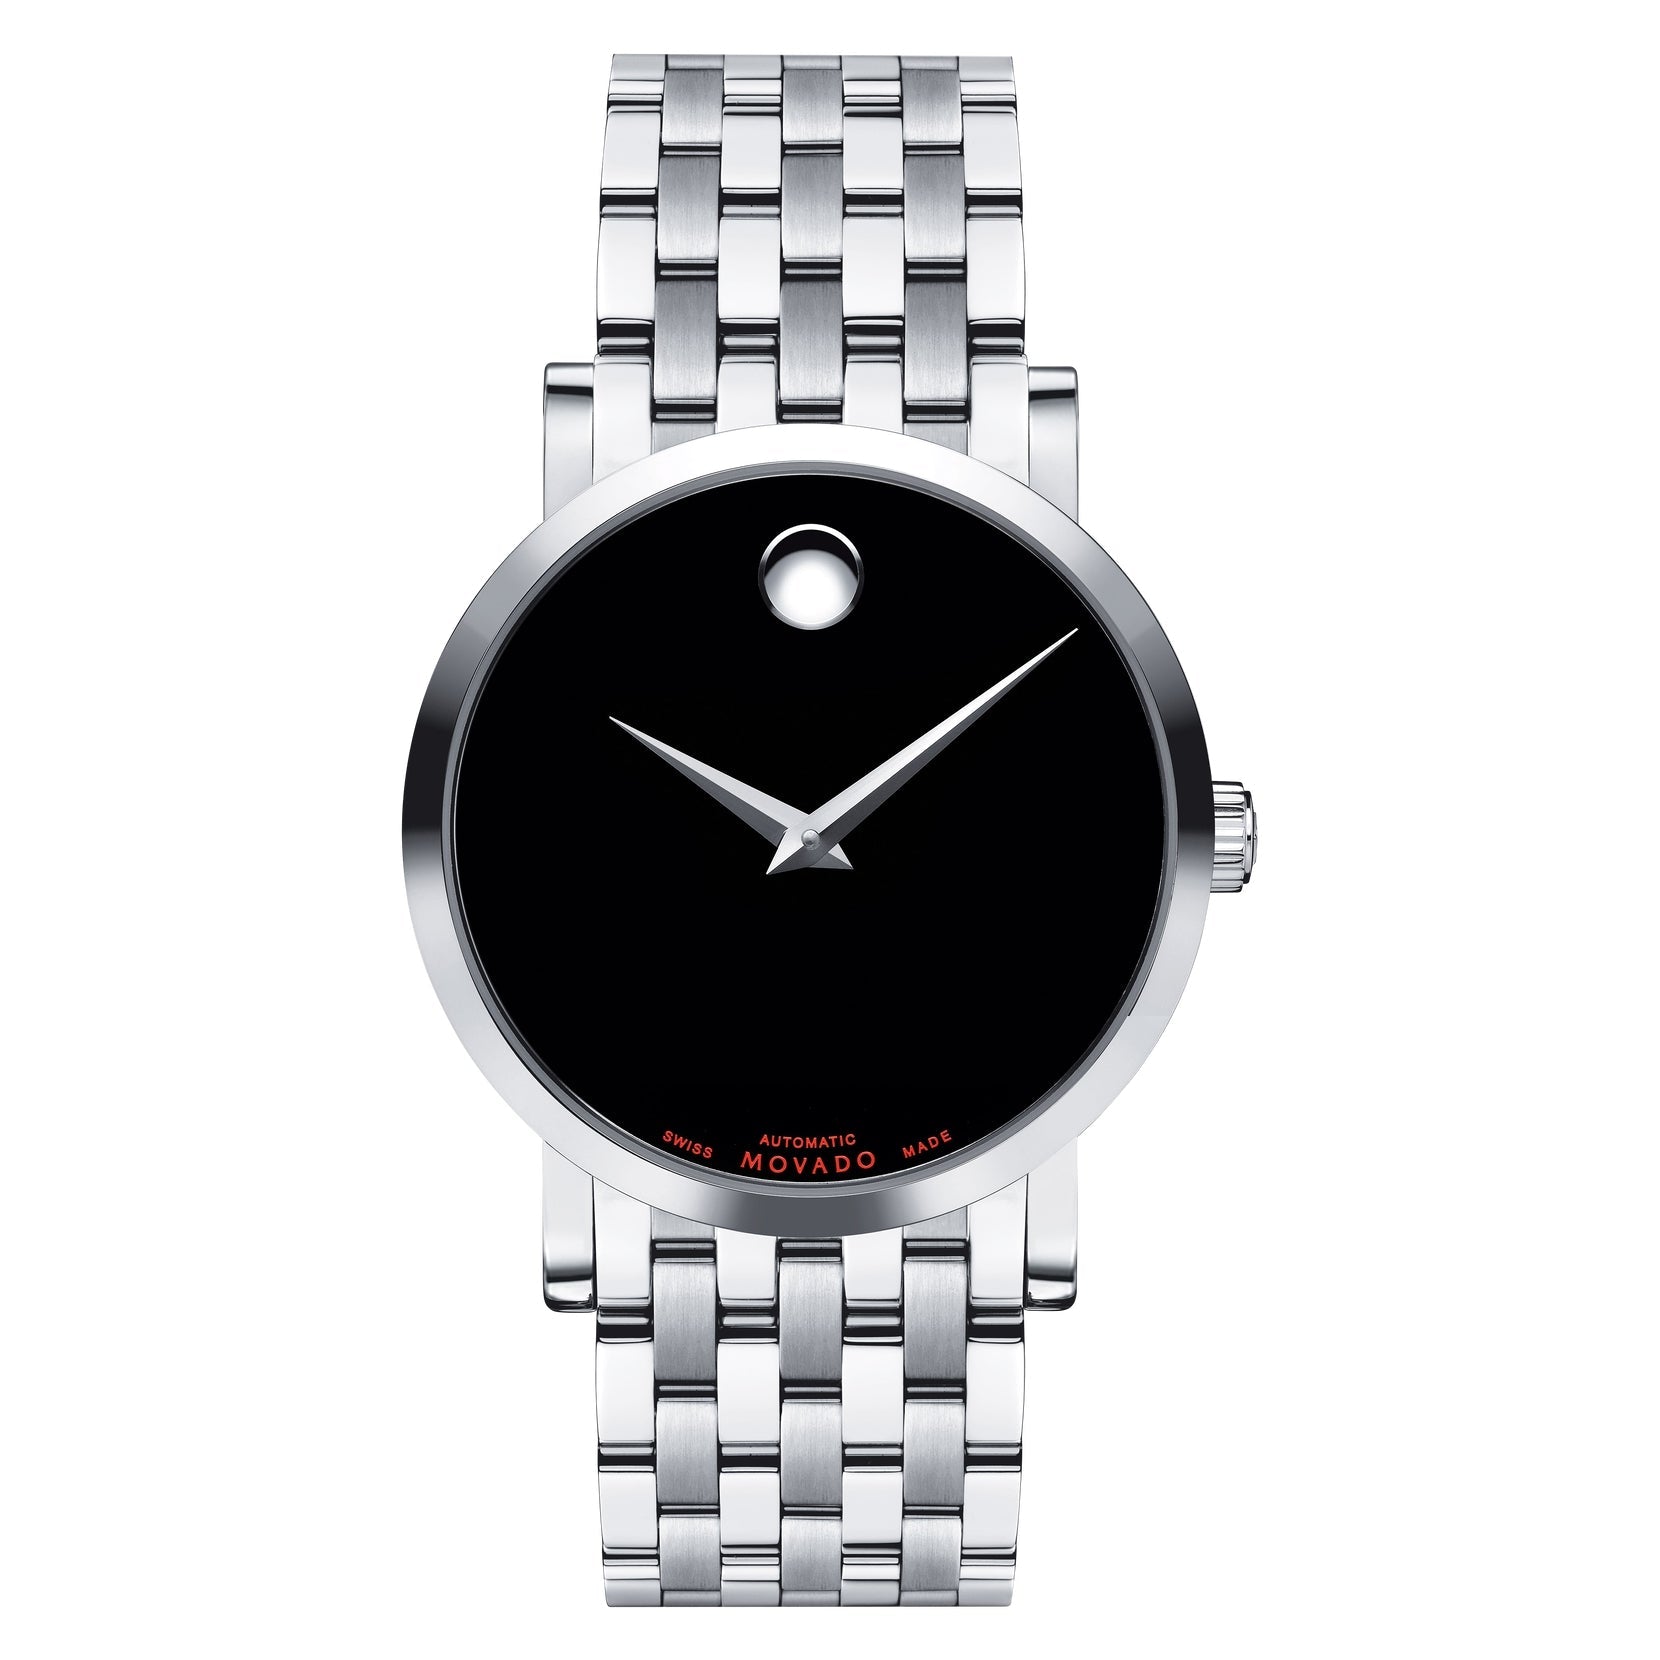 Movado Red Label Automatic Black Dial Men's Watch 0606115